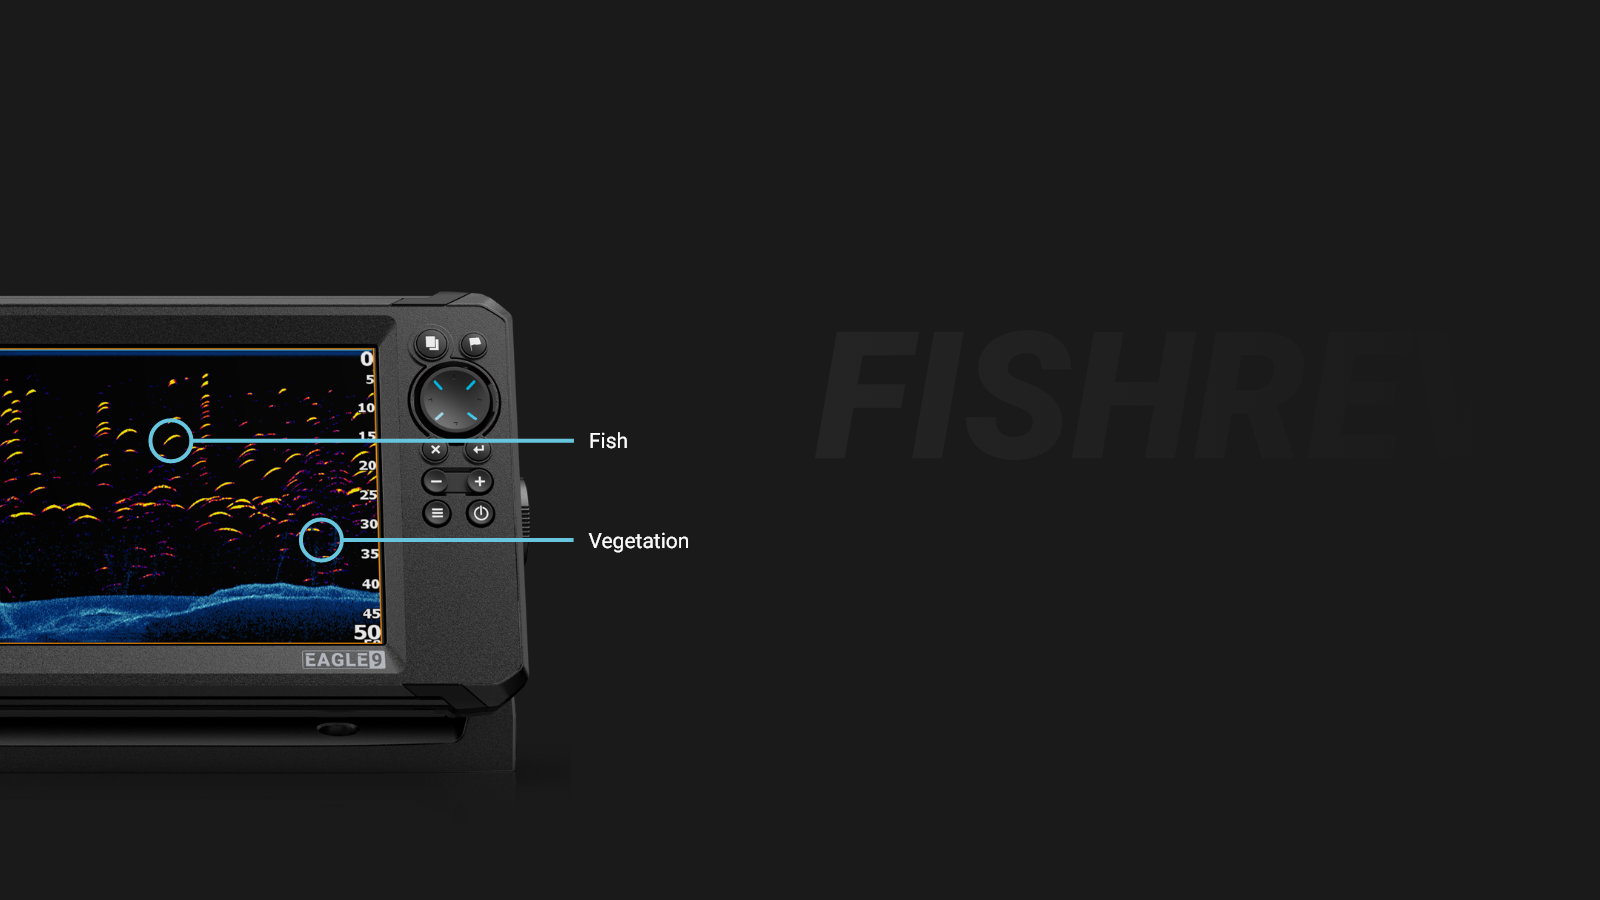 FishReveal features